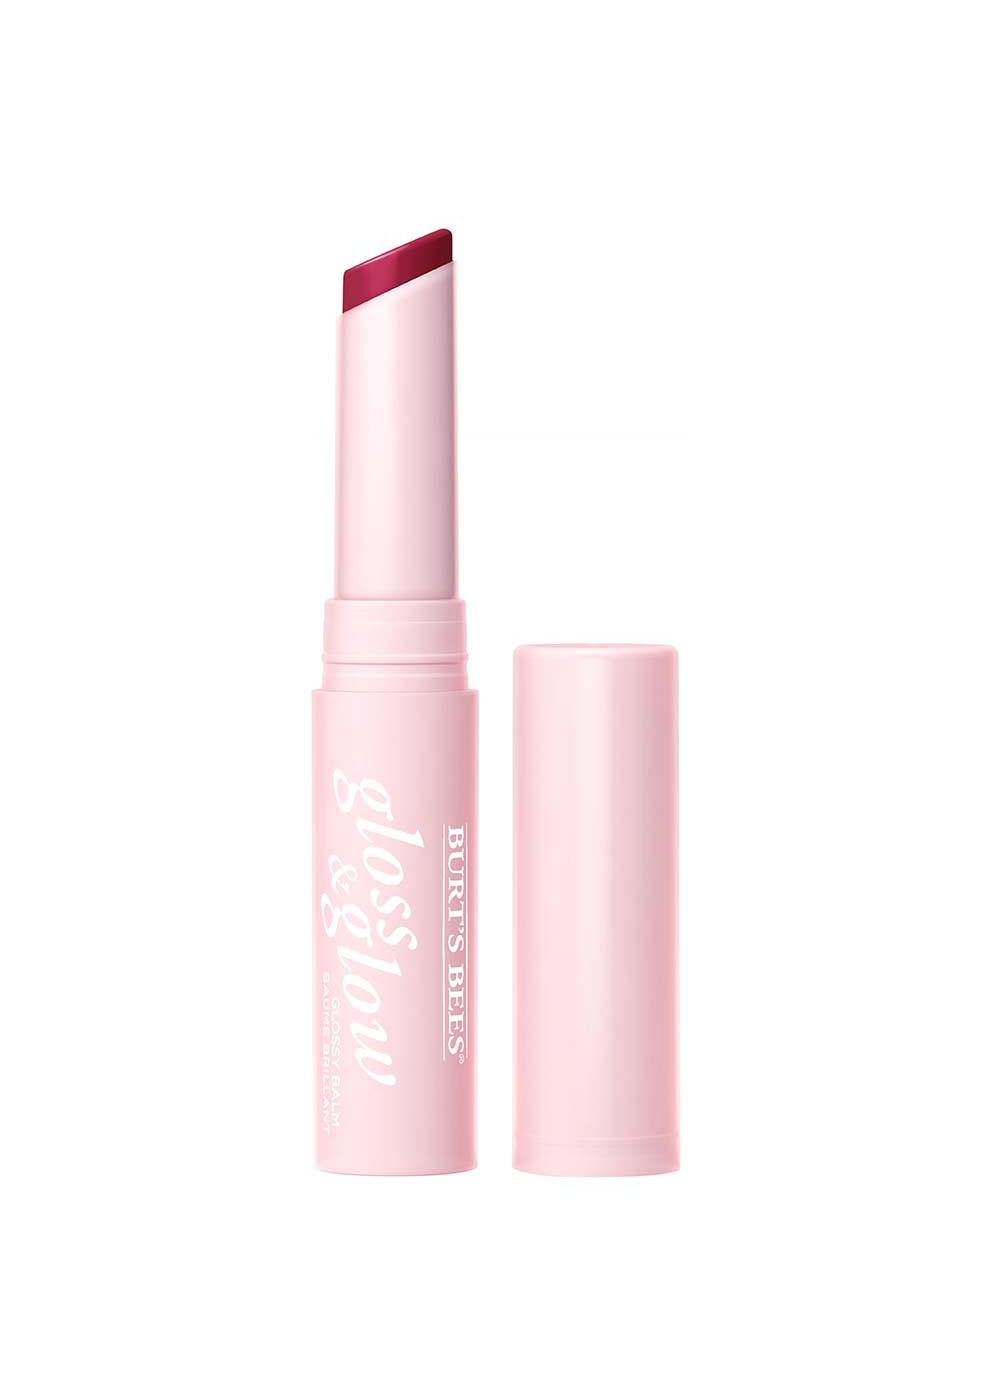 Burt's Bees Gloss and Glow Glossy Balm - Eat, Drink and Be Cherry; image 2 of 3